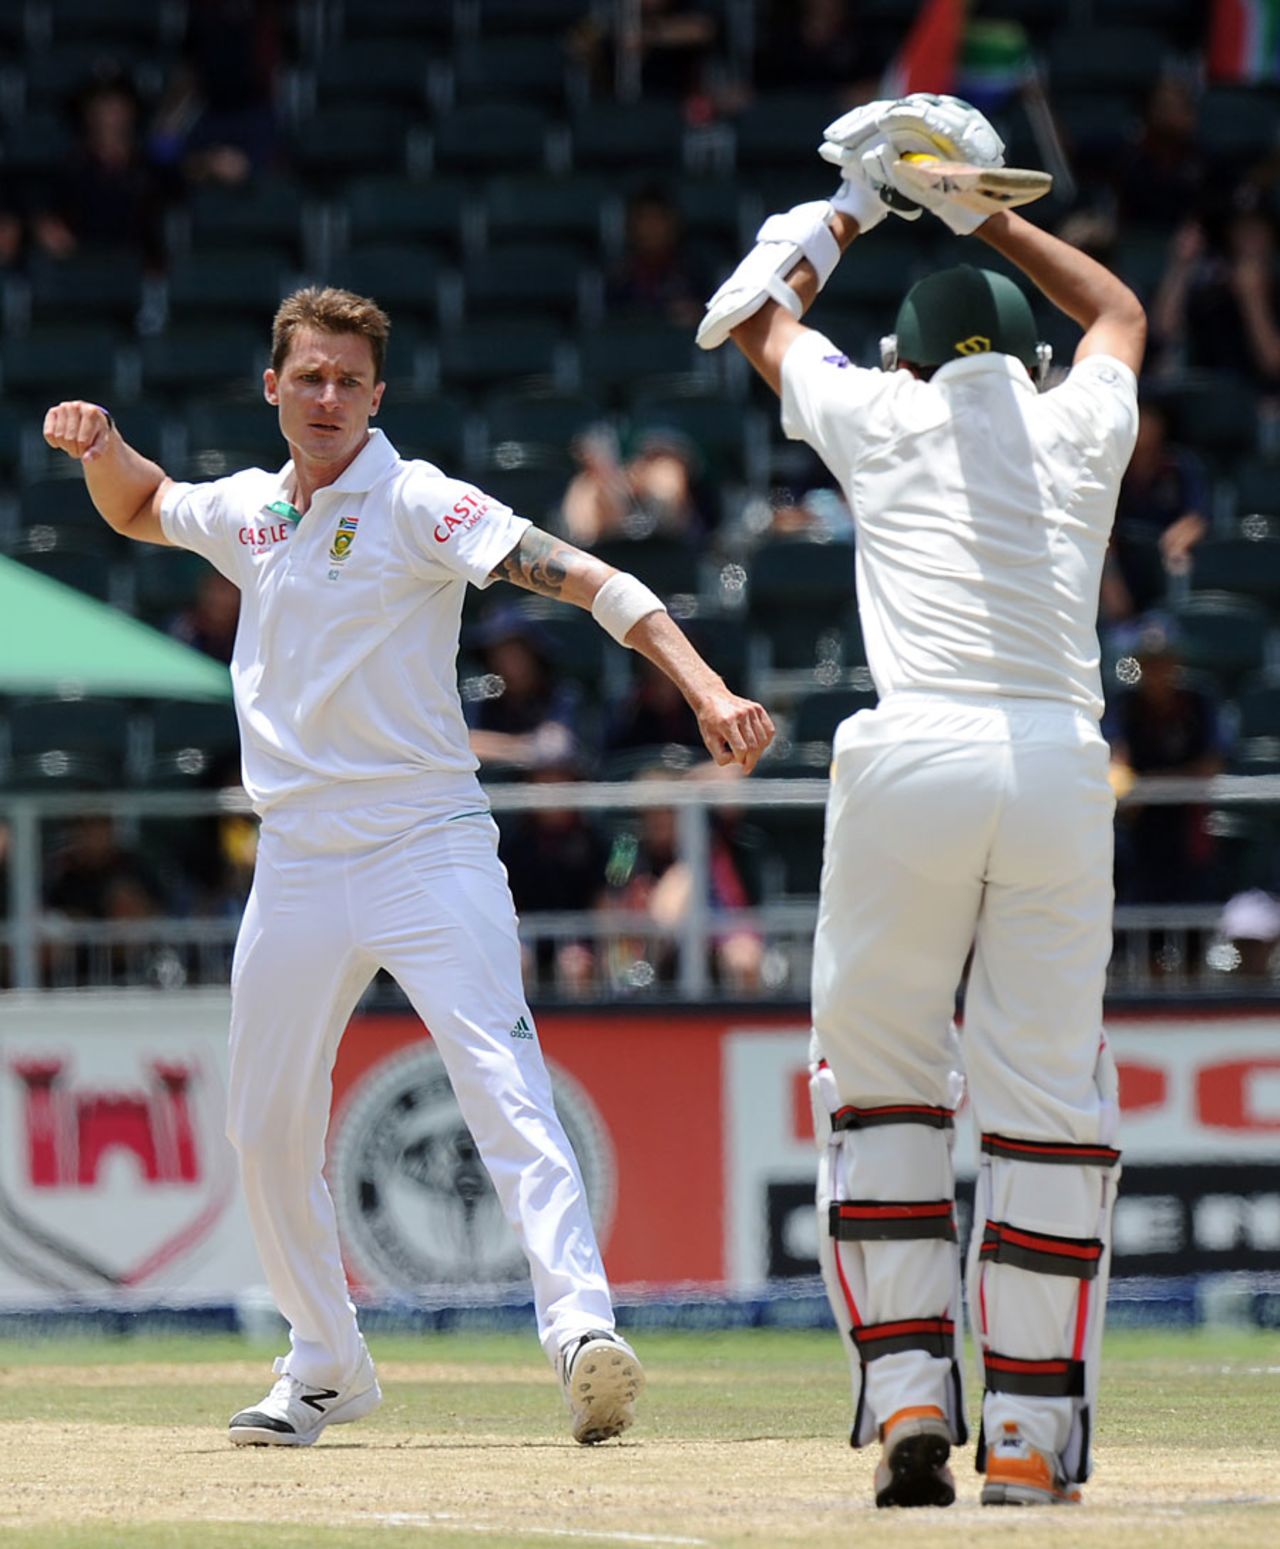 Dale Steyn's 11th wicket ended the Test, South Africa v Pakistan, 1st Test, Johannesburg, 4th day, February 4, 2013